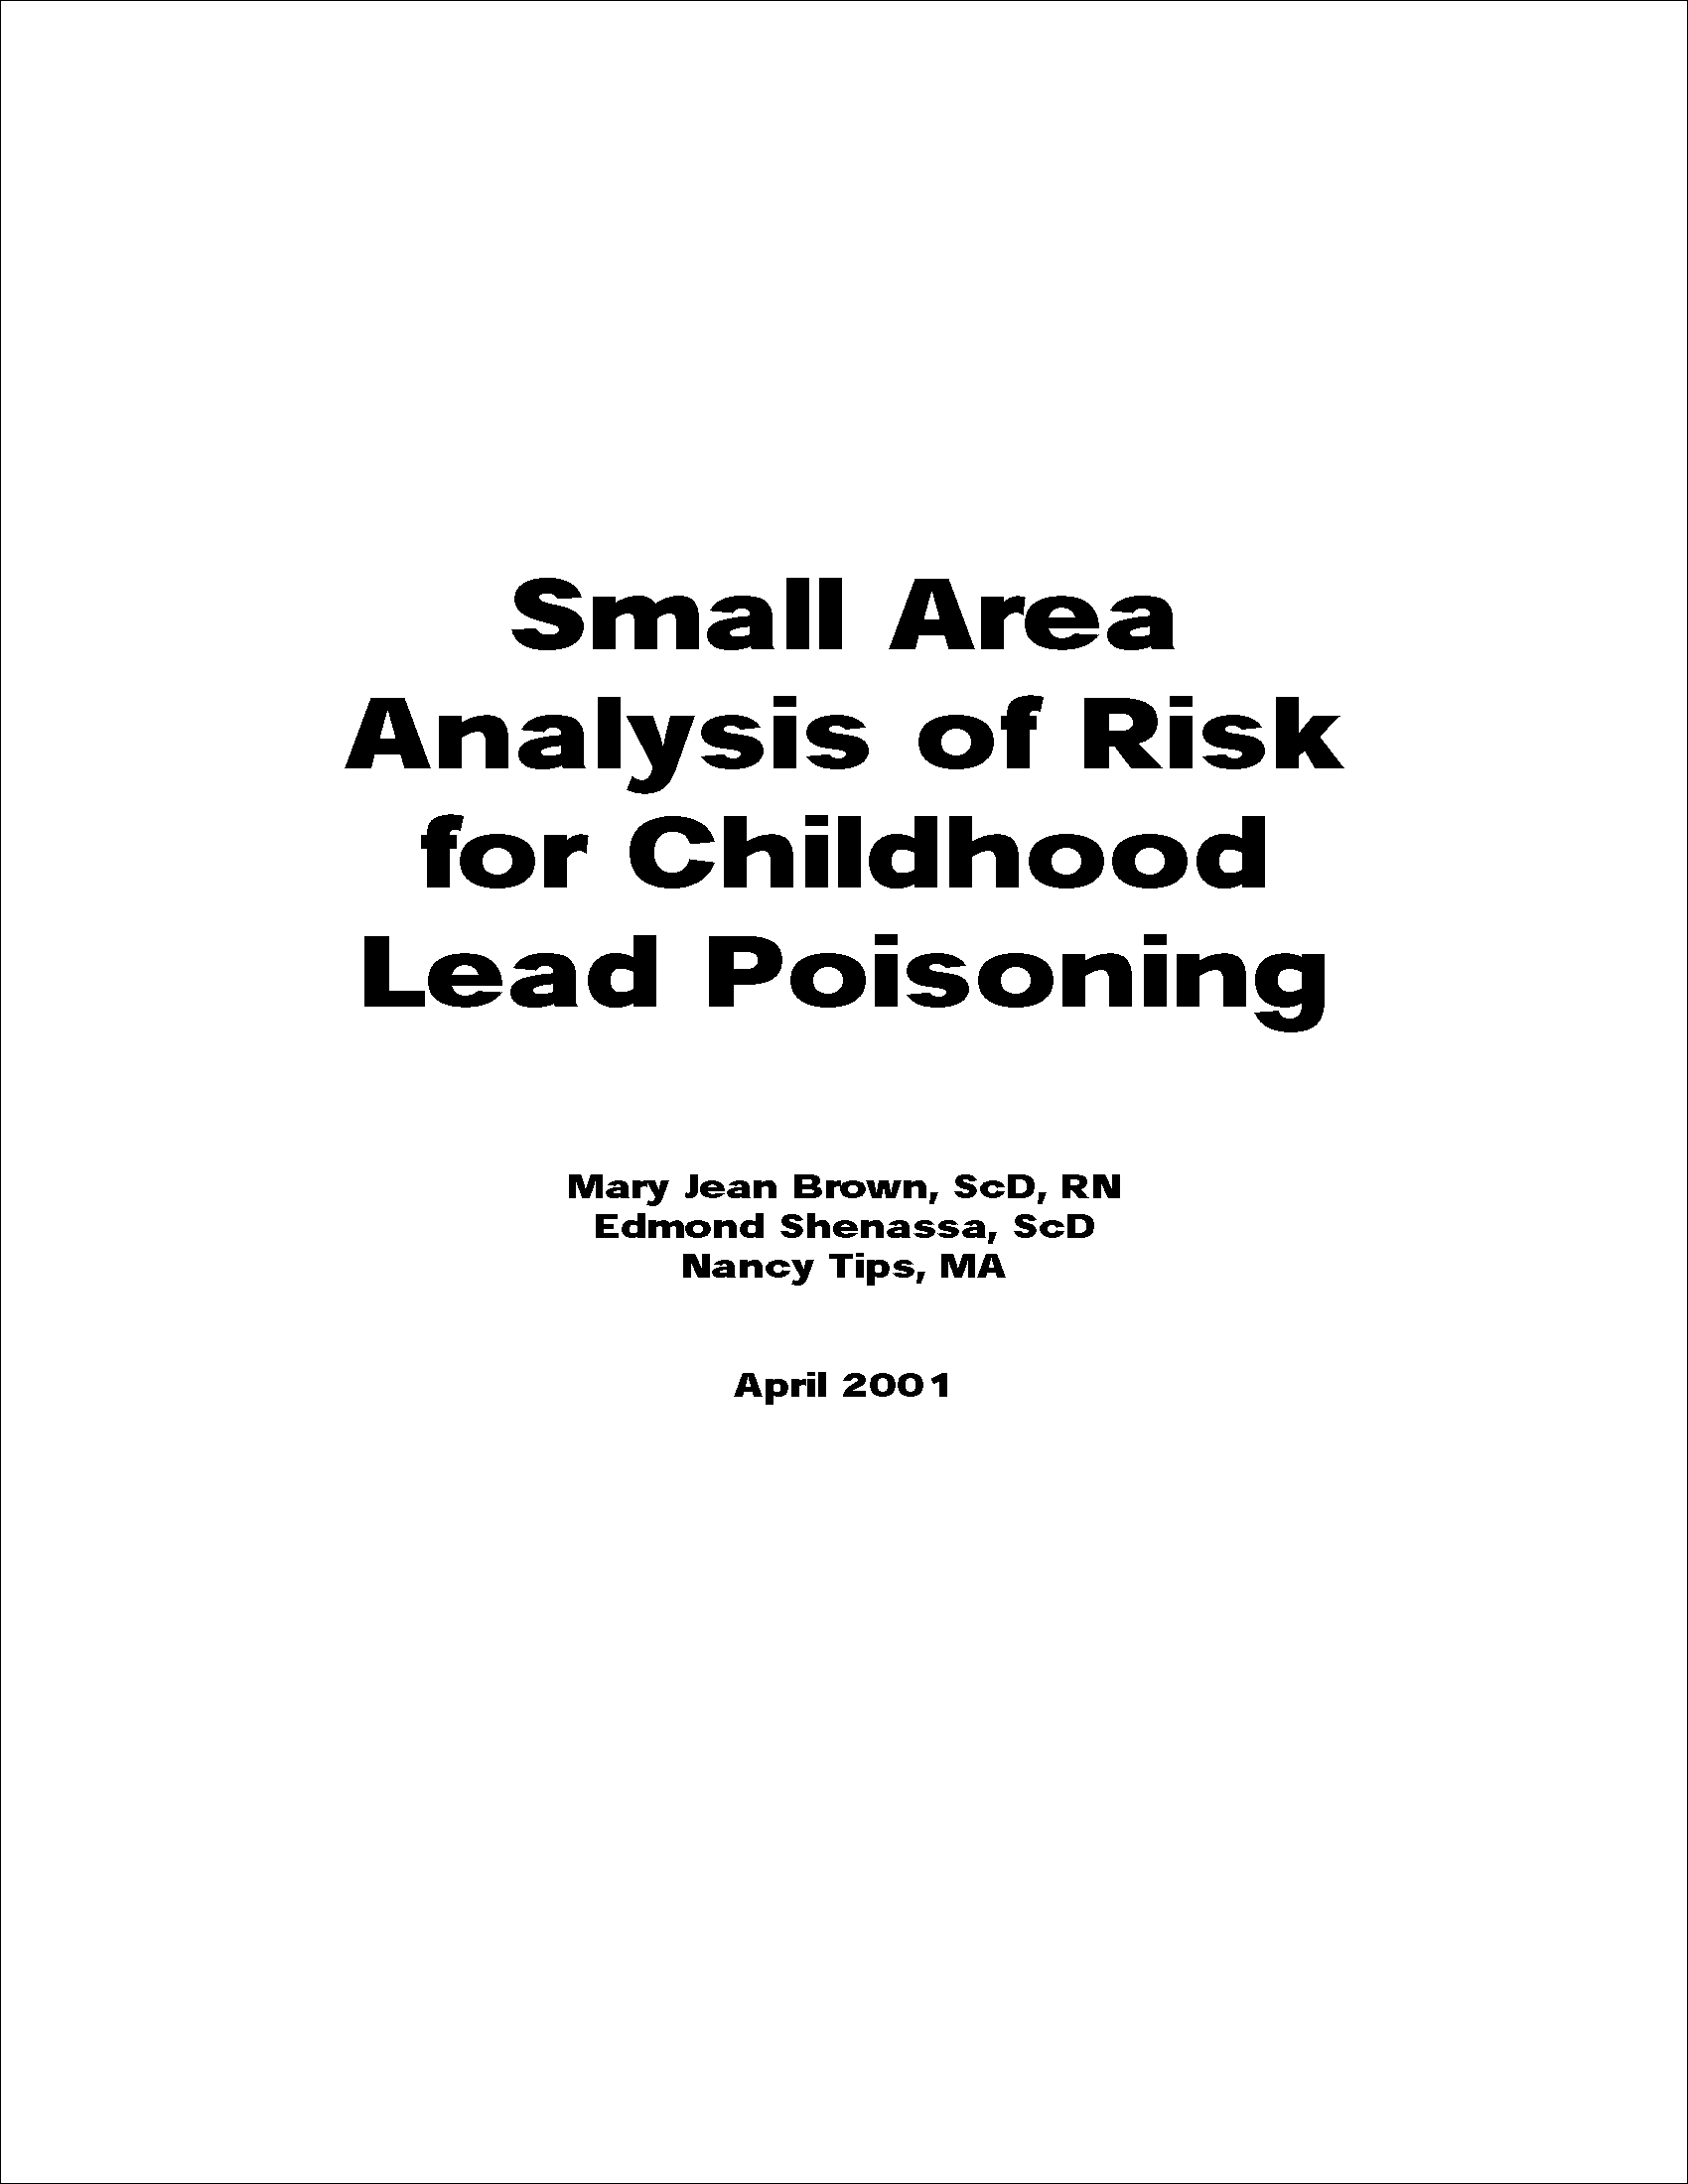 Small Area Analysis of Risk for Childhood Lead Poisoning